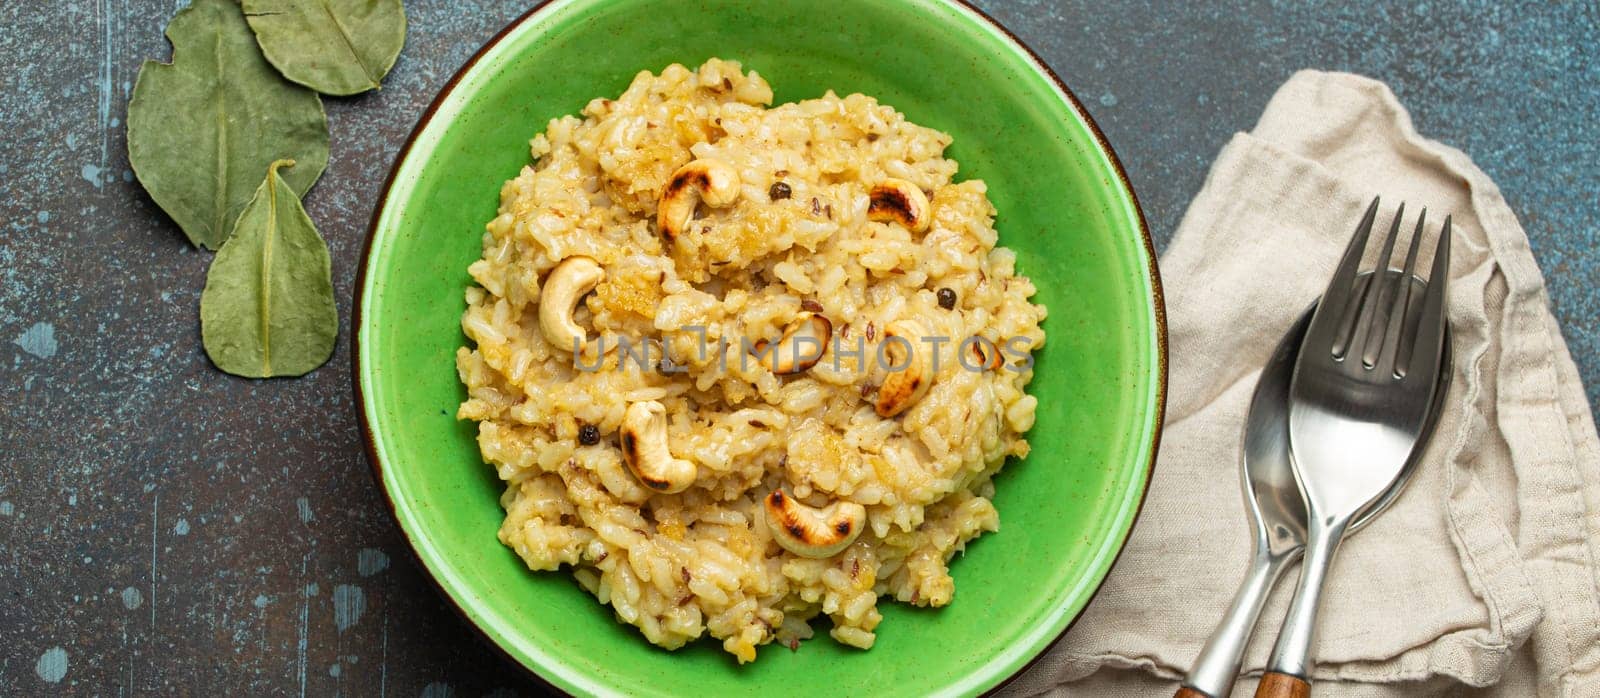 Ven Pongal (Khara Pongal), traditional Indian savoury rice dish made during celebrating Pongal festival, served in bowl top view on concrete rustic background by its_al_dente